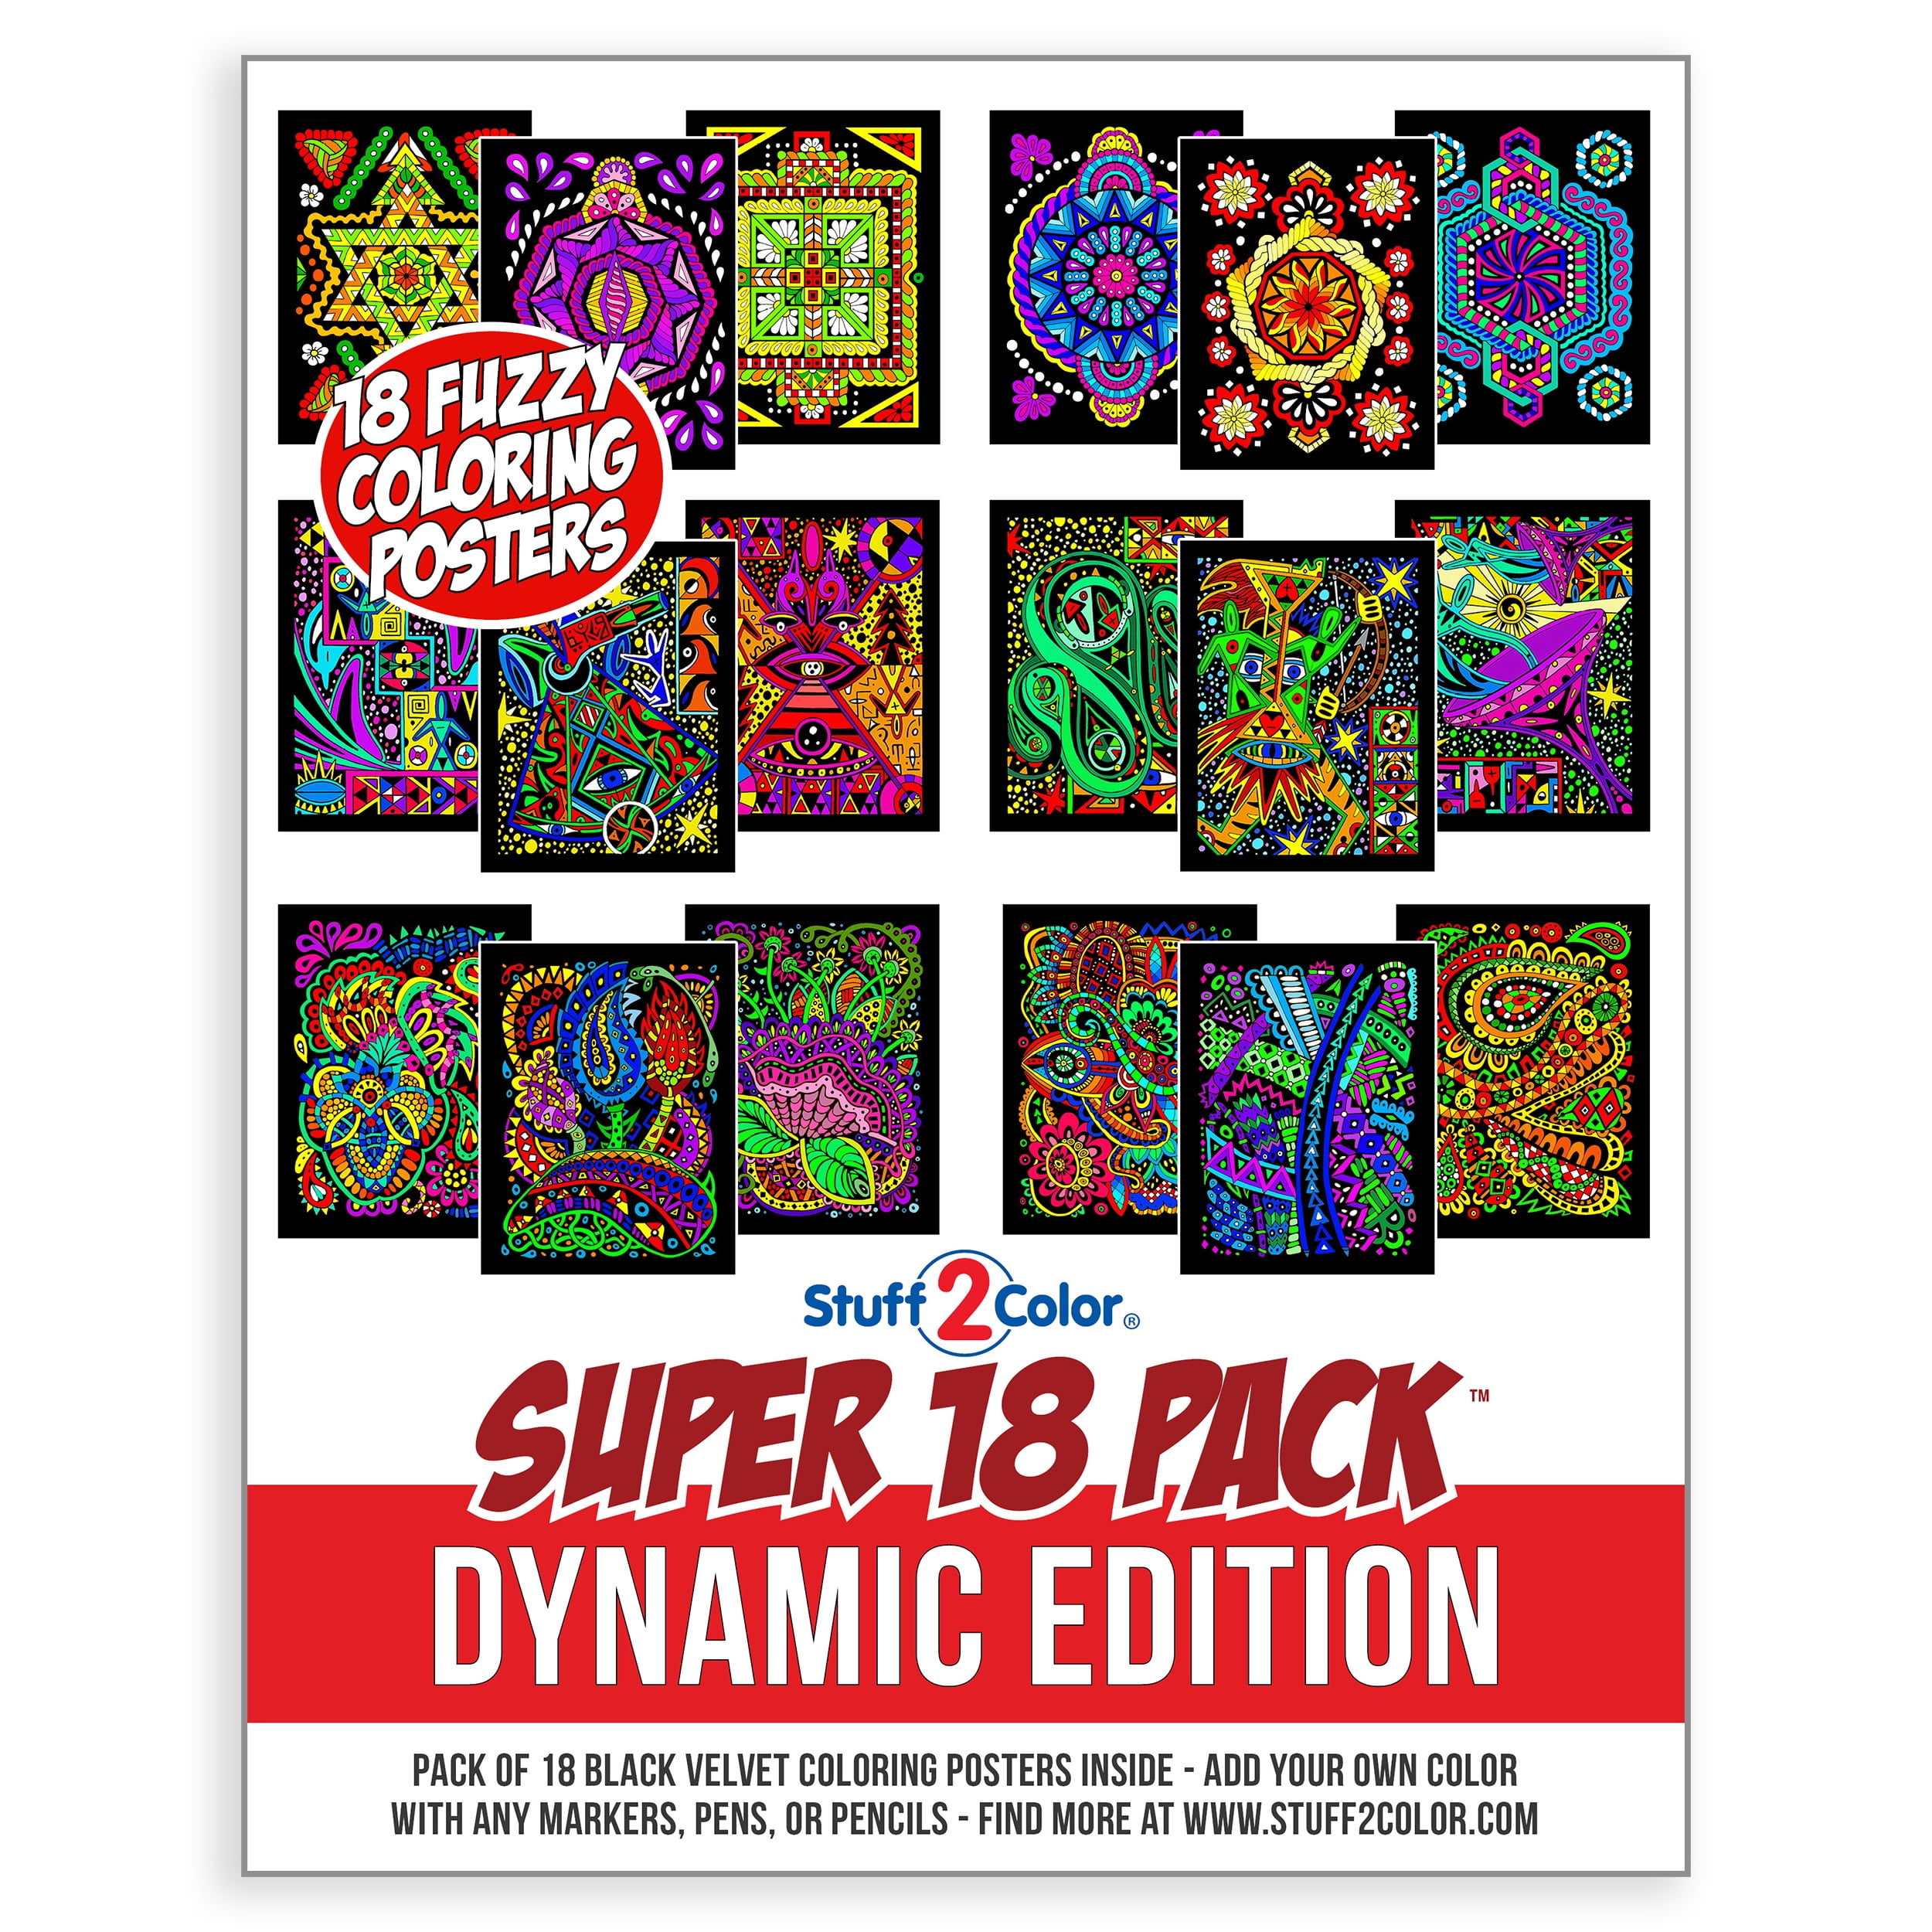 Super Pack of 18 Fuzzy Velvet Coloring Posters (Dynamic Edition)